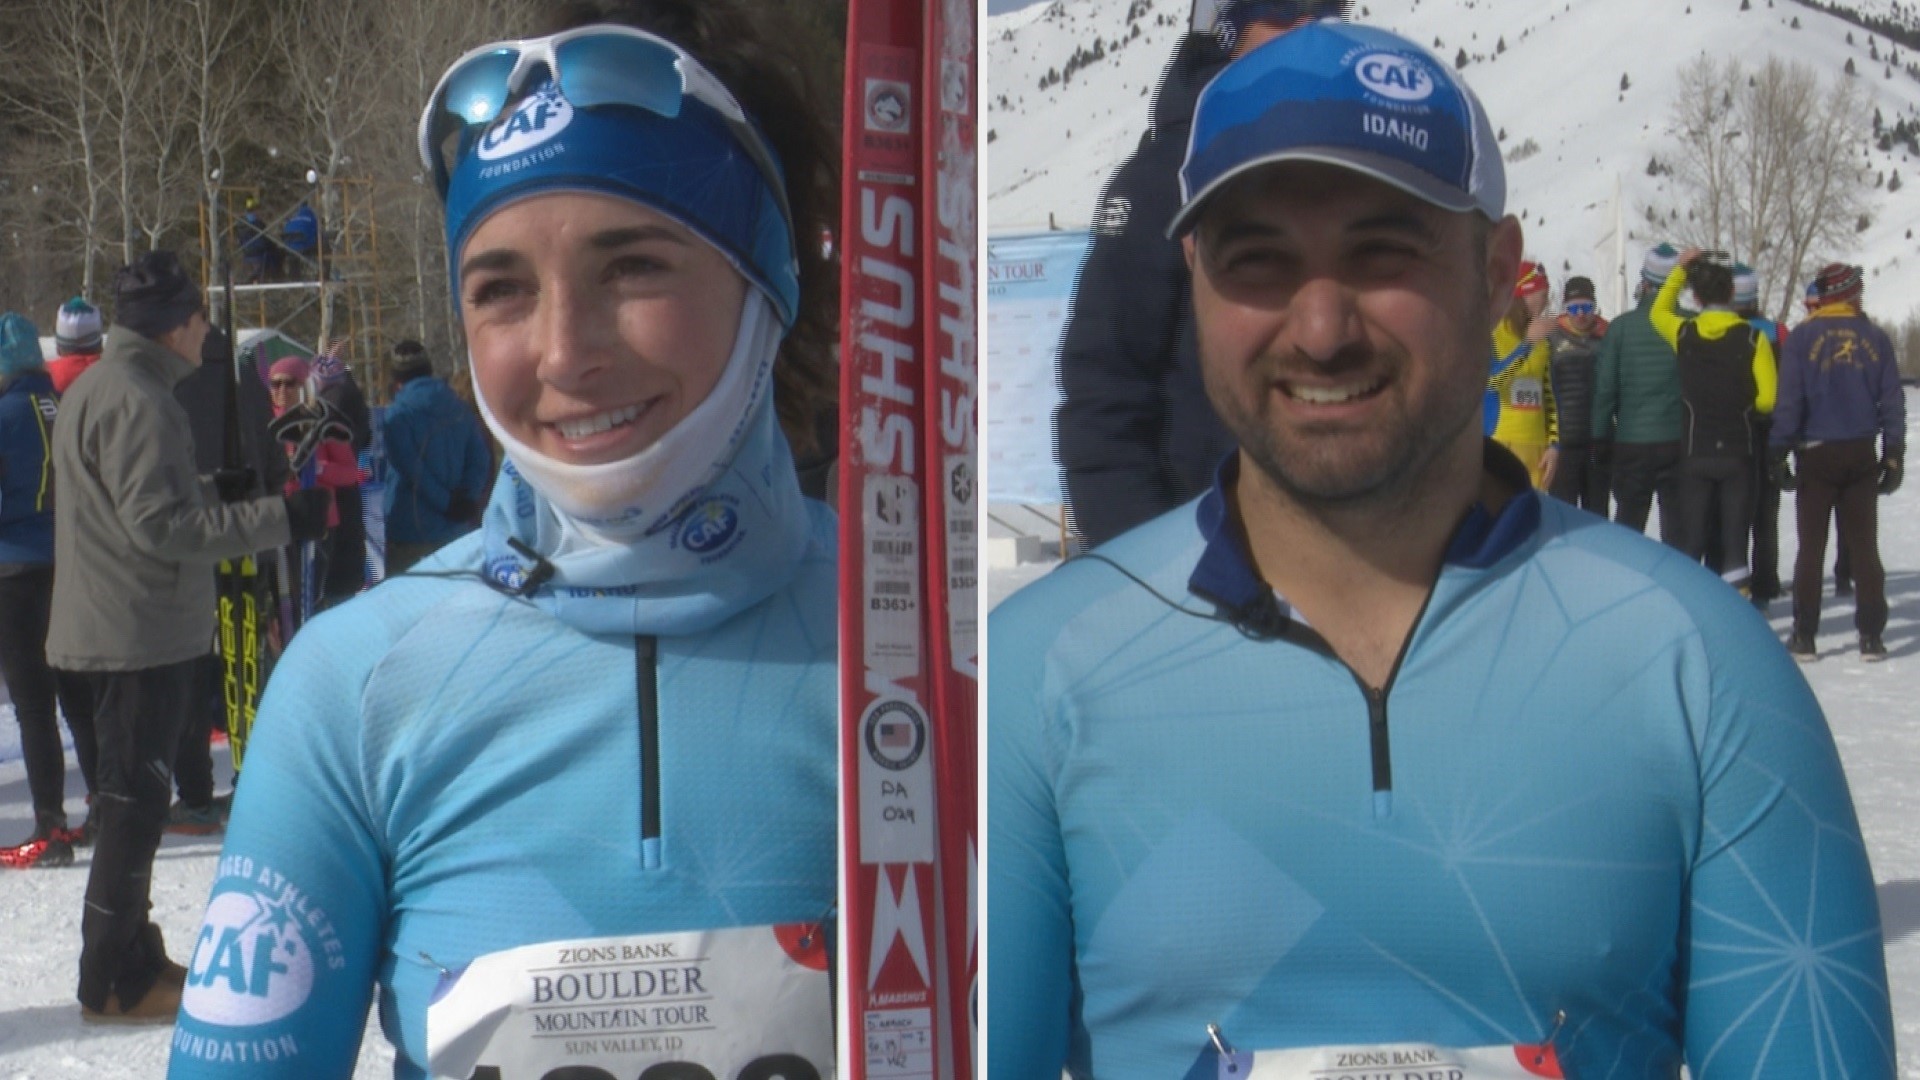 Paralympic Nordic skiers from the Treasure Valley competed in the Boulder Mountain Tour in Ketchum Saturday, their last race before they head to Beijing.